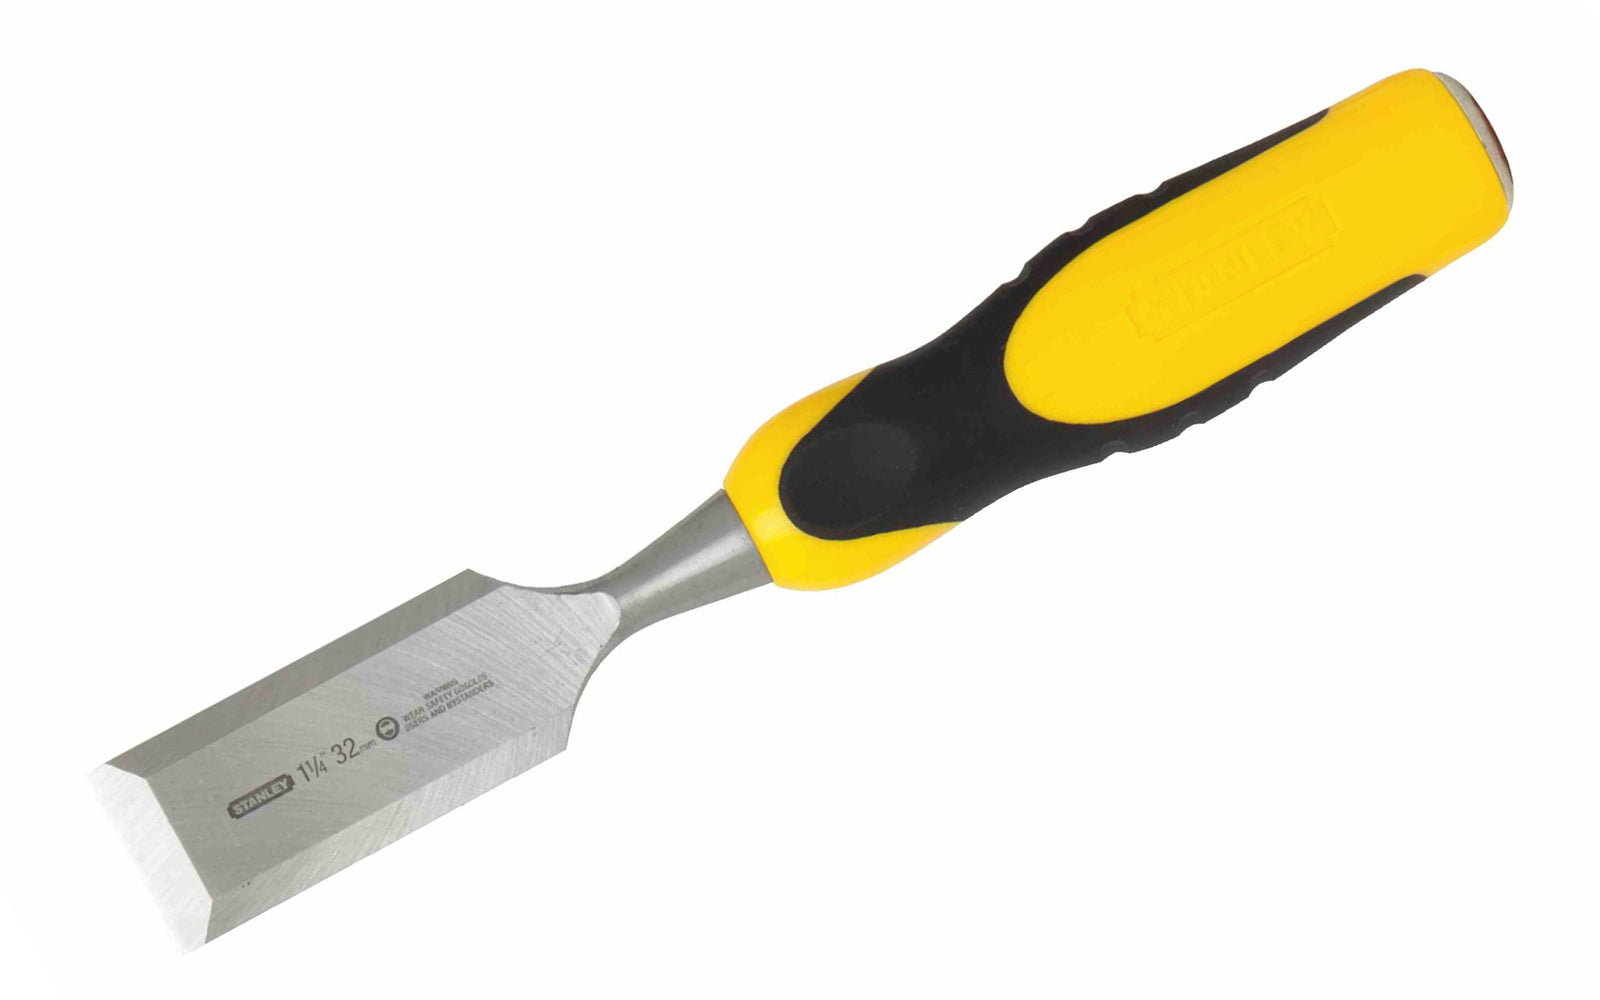 Stanley 1-1/4" (32 mm) Wood Chisel ~ 16-320 - High-carbon chrome steel - hardened & tempered